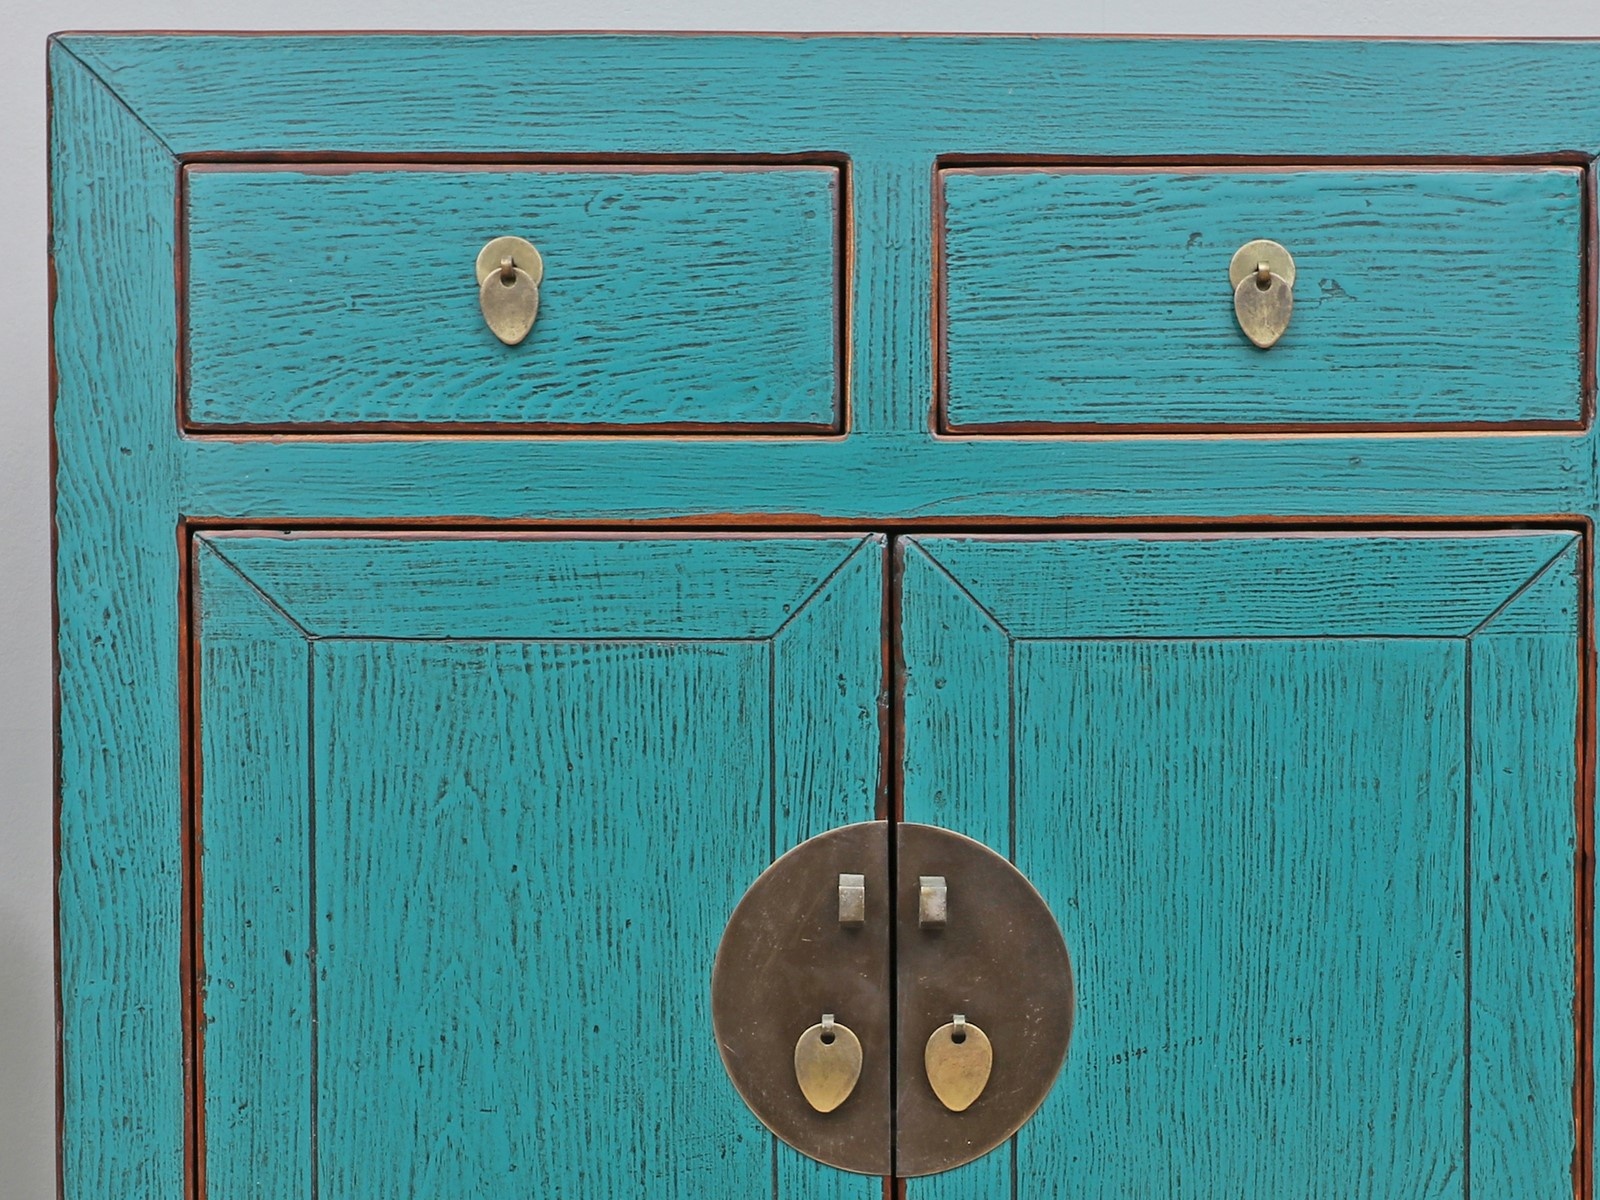 Antique Chest Of Drawers 2 Doors 2 Drawers Turquoise Yajutang